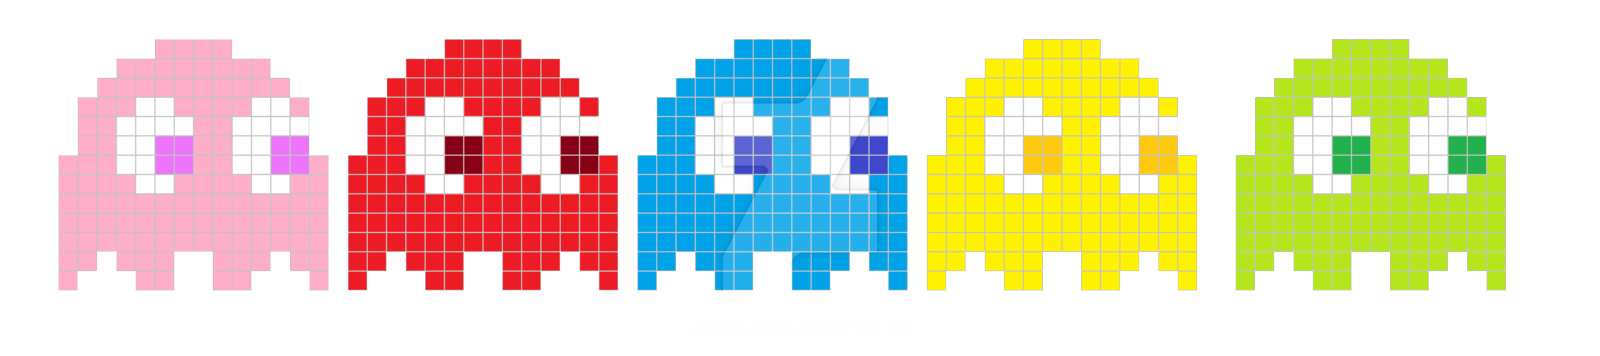 Diagram Text Pacman Ghosts Ms Free PNG HQ PNG Image